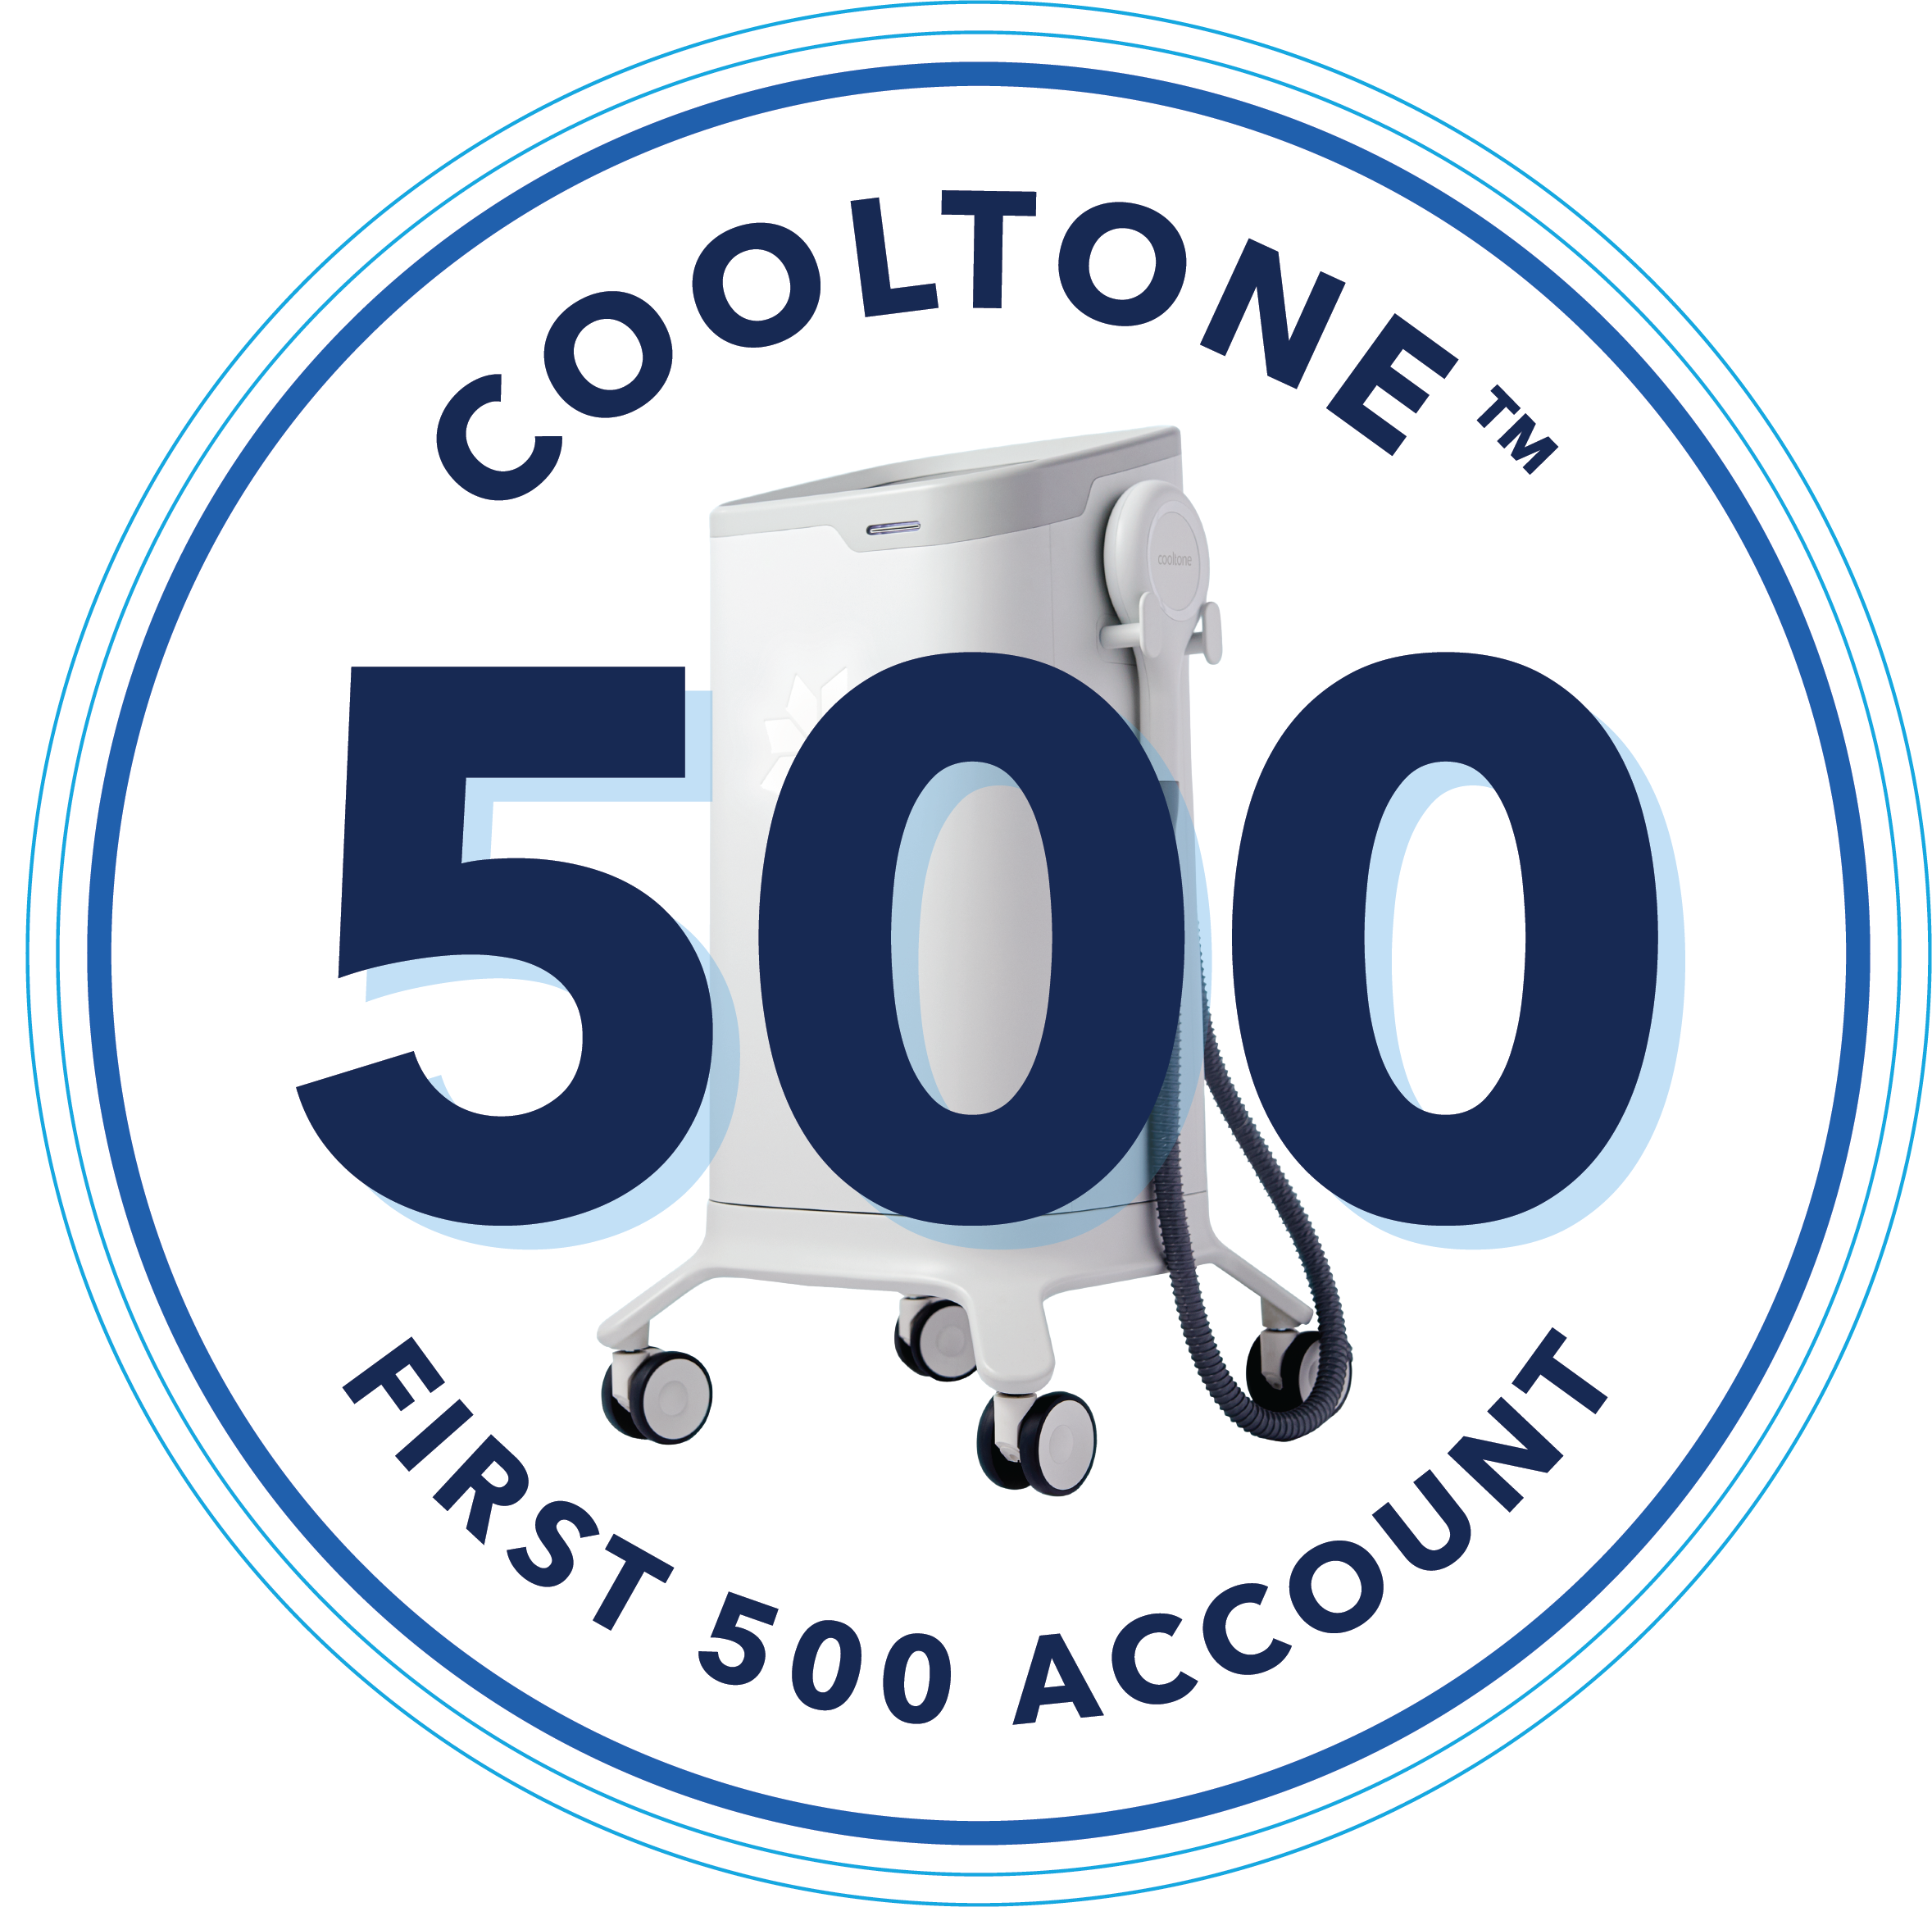 CoolTone First 500 Badge